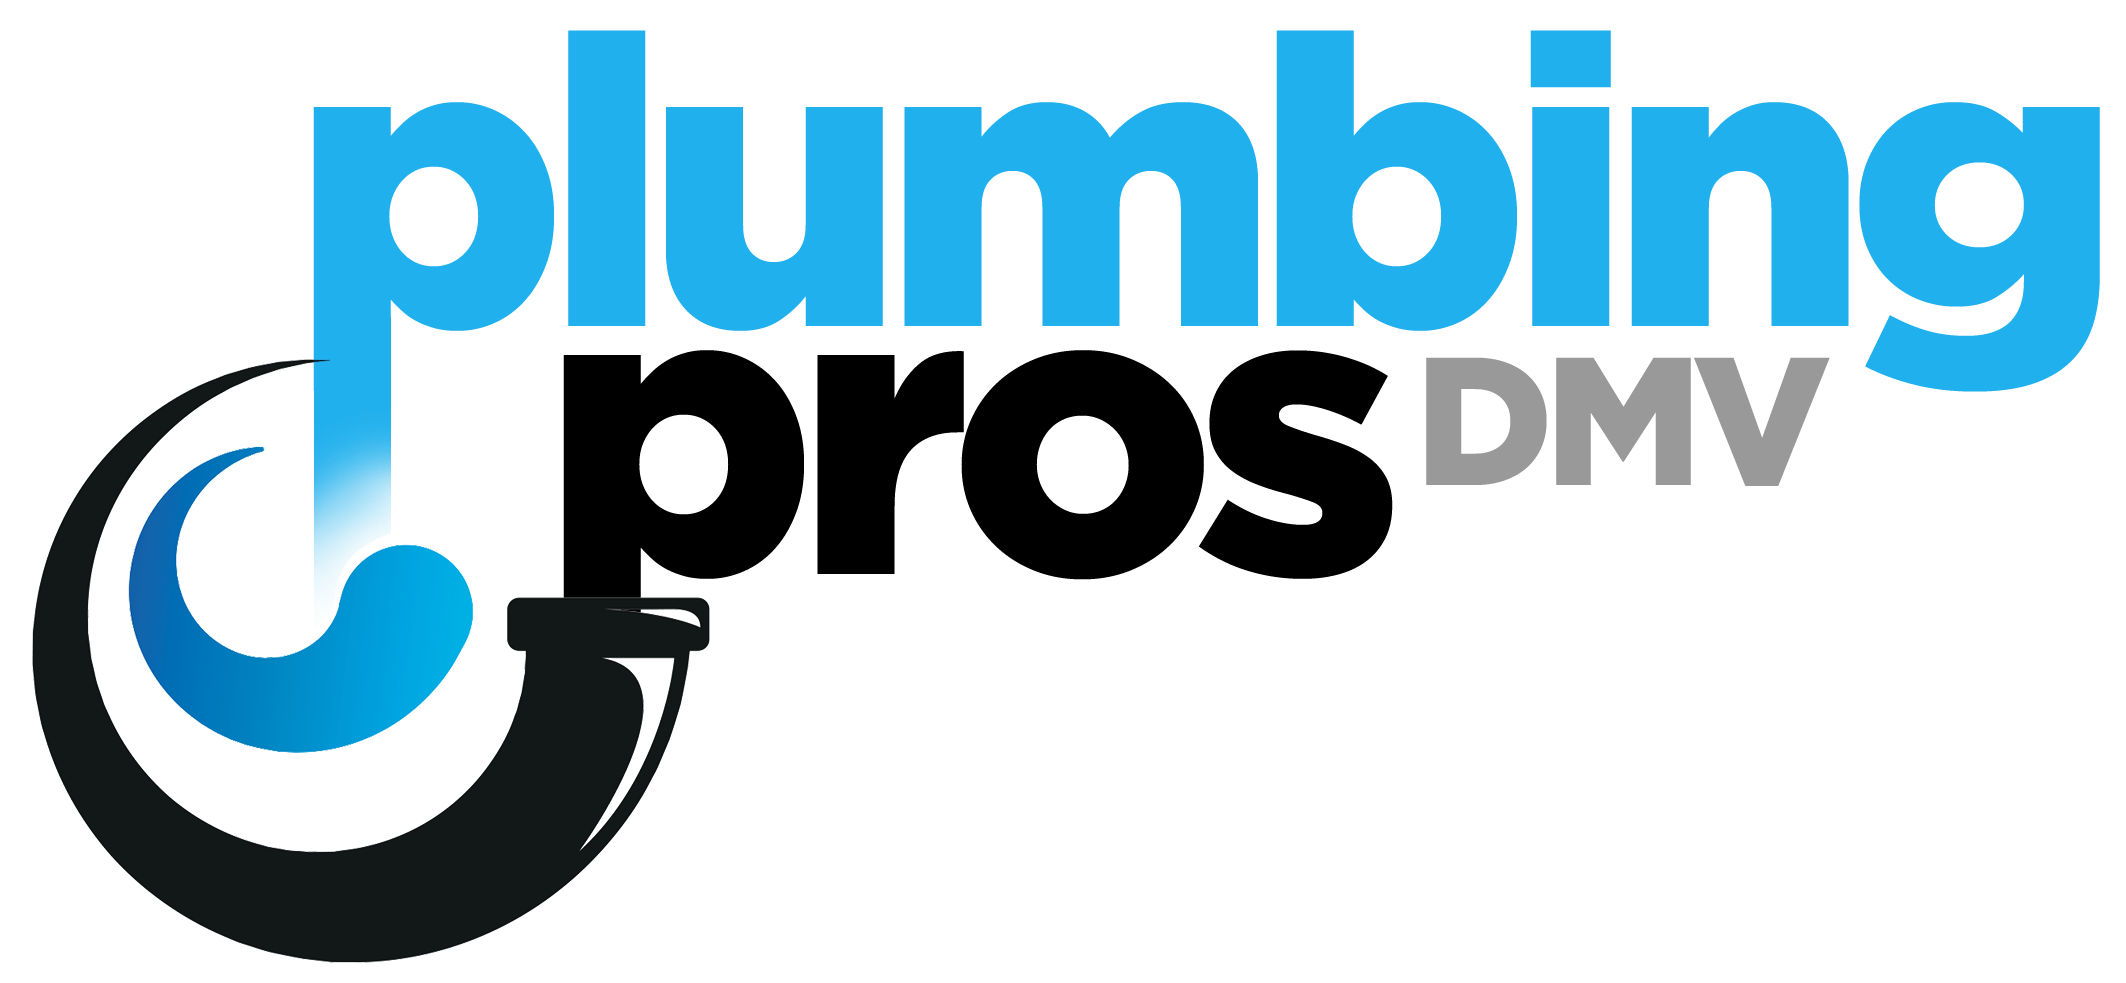 Local Plumber In Germantown, MD Offers Affordable & Fast Drain Cleaning Service